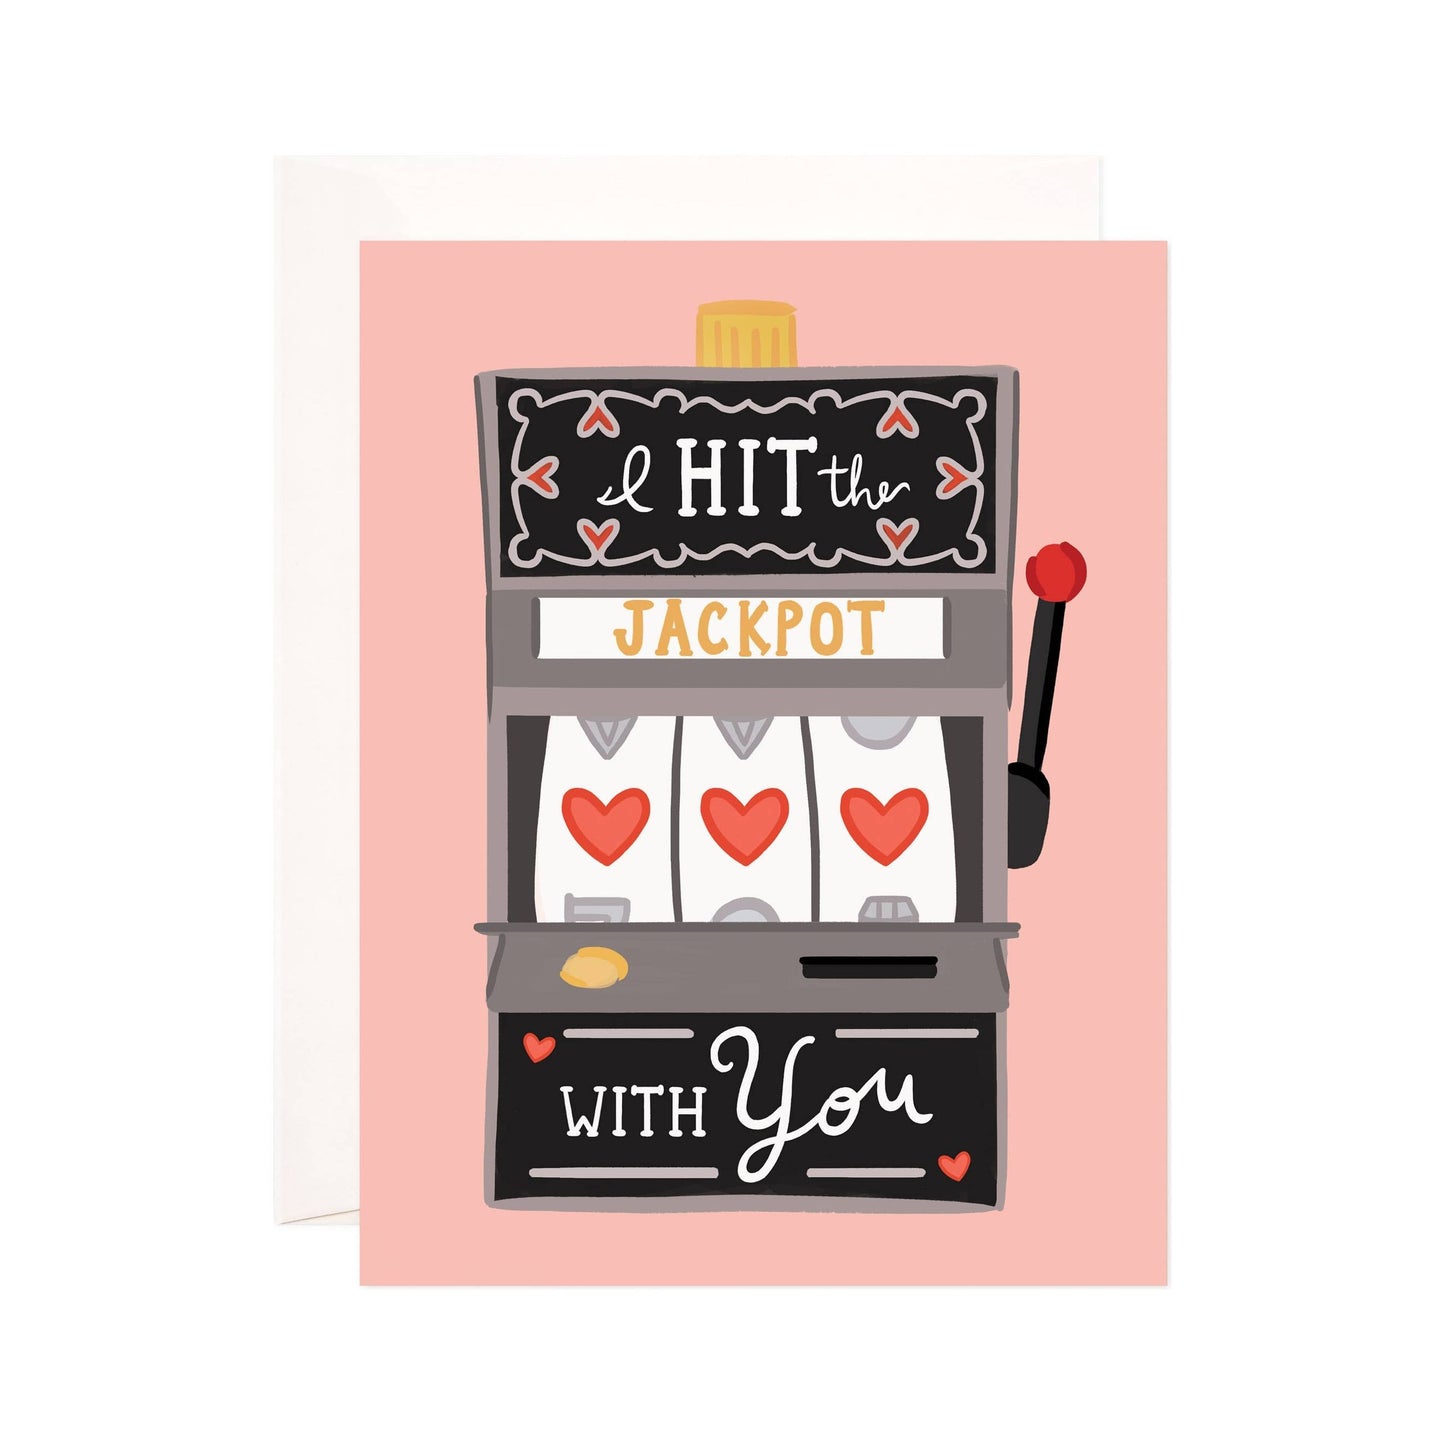 "I Hit the Jackpot with U" Greeting Card